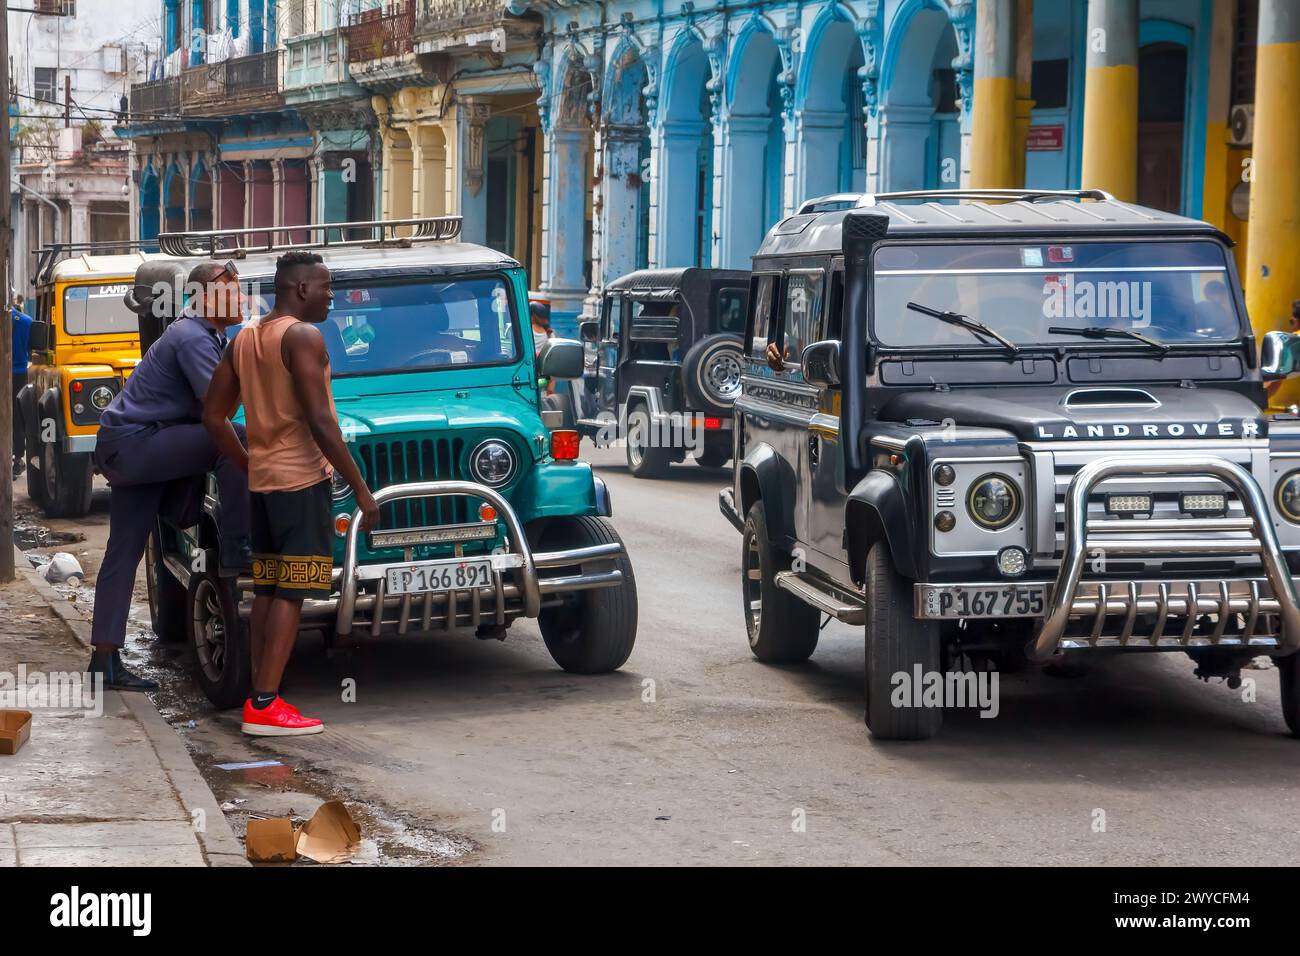 Cuban man by an old jeep, other vehicles in the city street in Havana, Cuba Stock Photo